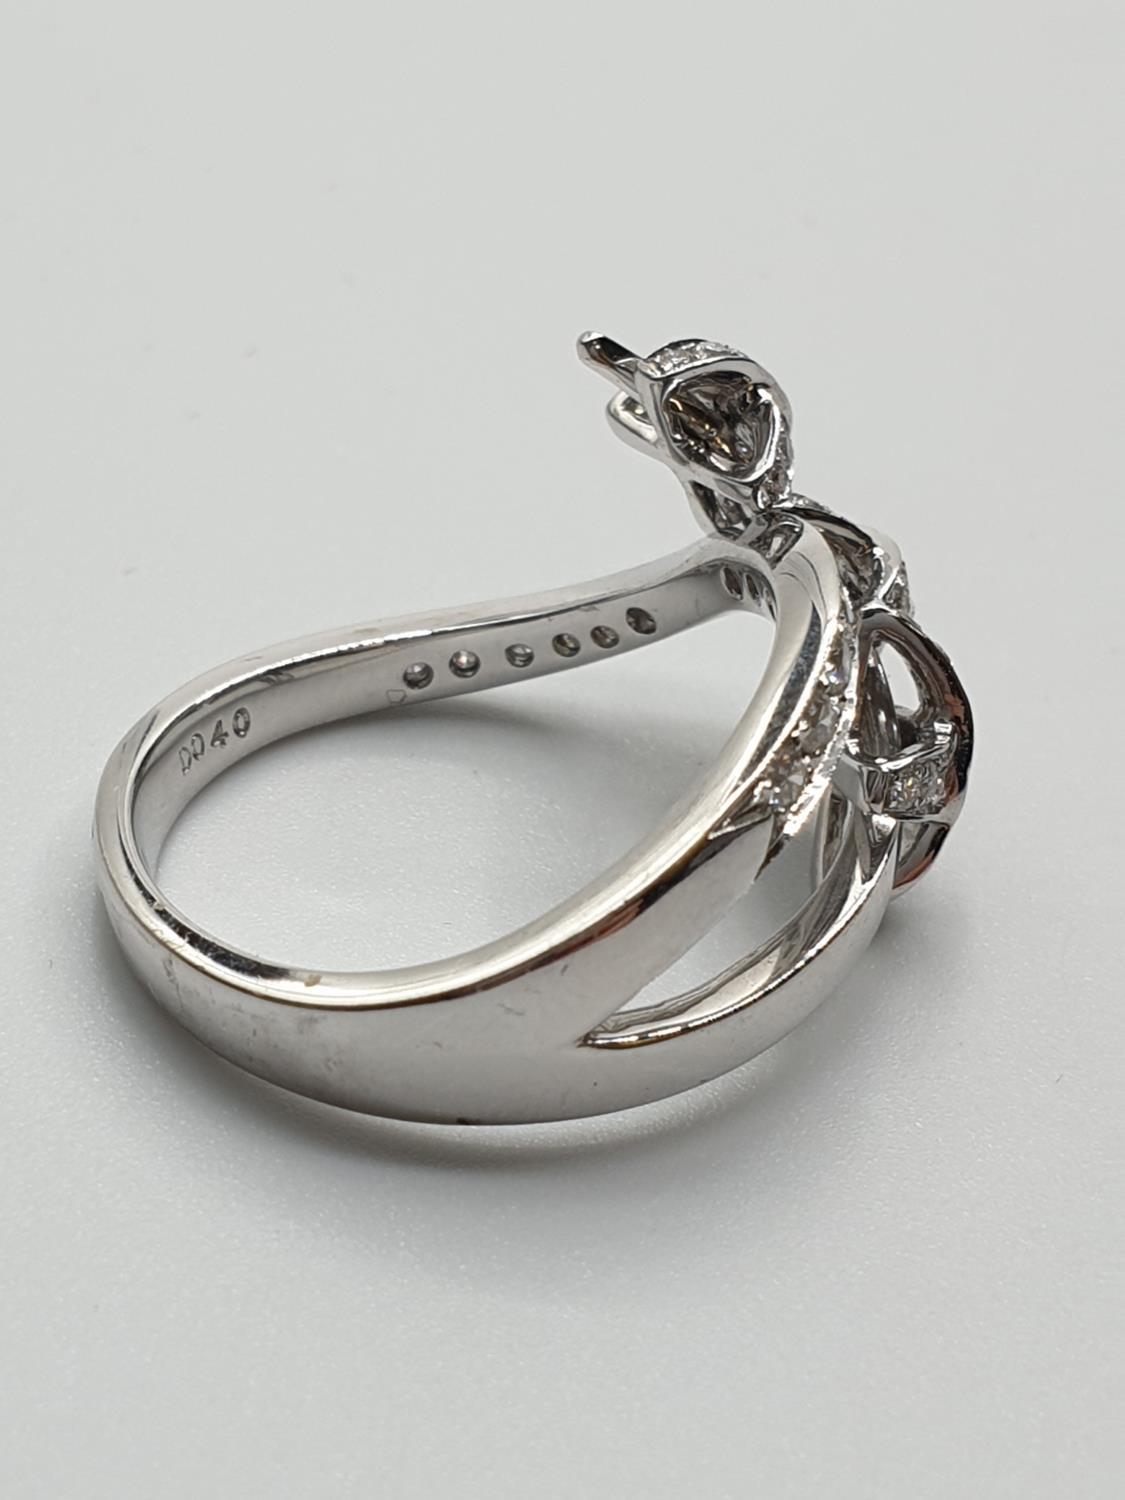 18ct White Gold Diamond Ring, weight 4.7g and approx 0.40ct diamonds, size J/K - Image 6 of 7